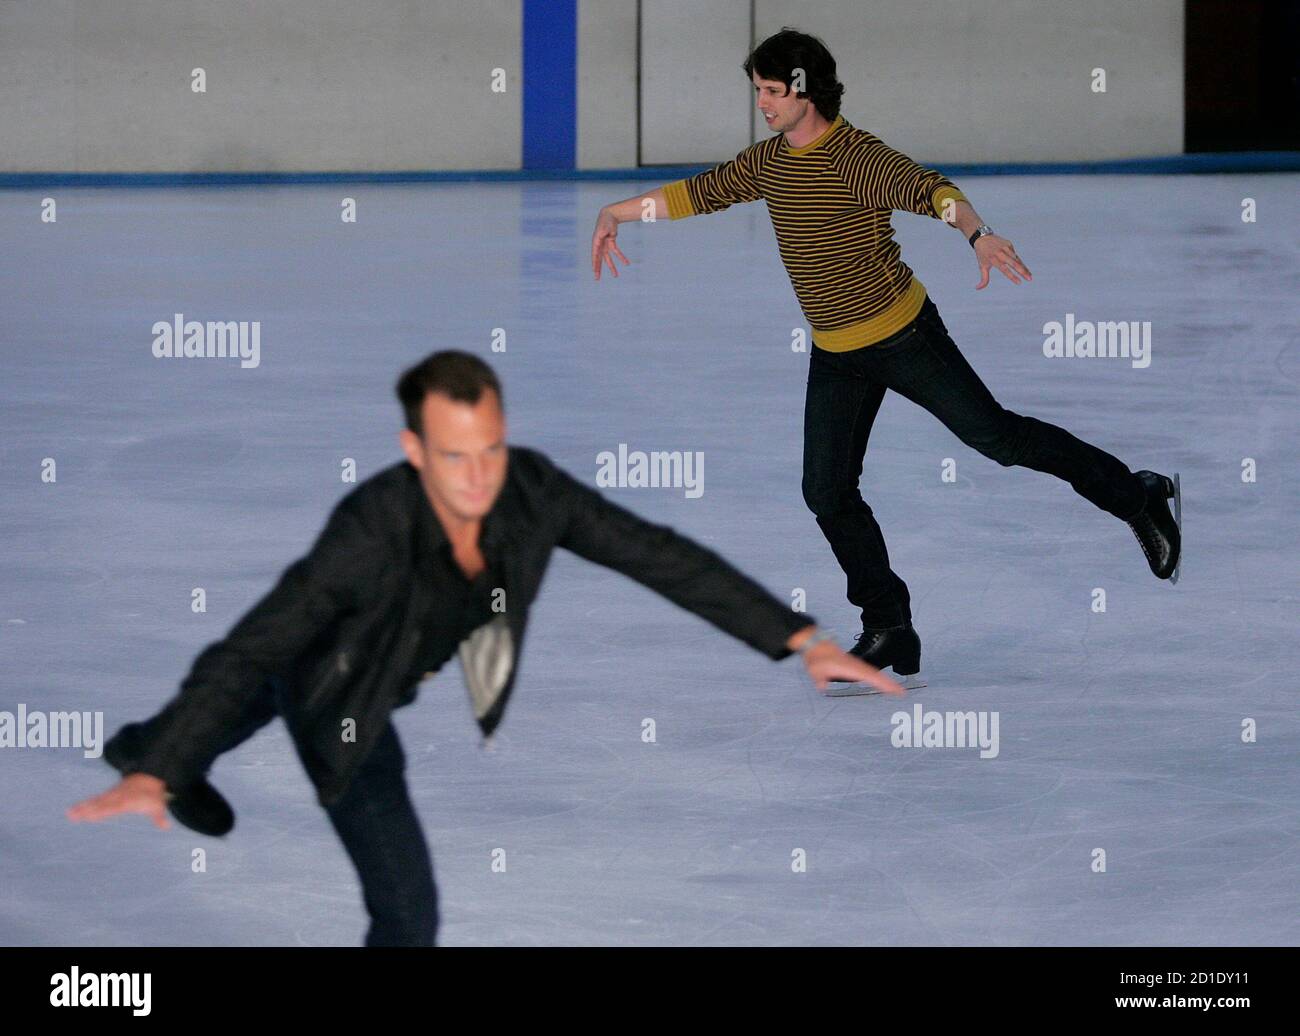 Actors Jon Heder (R) and Will Arnett skate during a media opportunity at an ice skating rink to promote their film "Blades of Glory" in Sydney June 6, 2007.         REUTERS/Tim Wimborne     (AUSTRALIA) Stock Photo